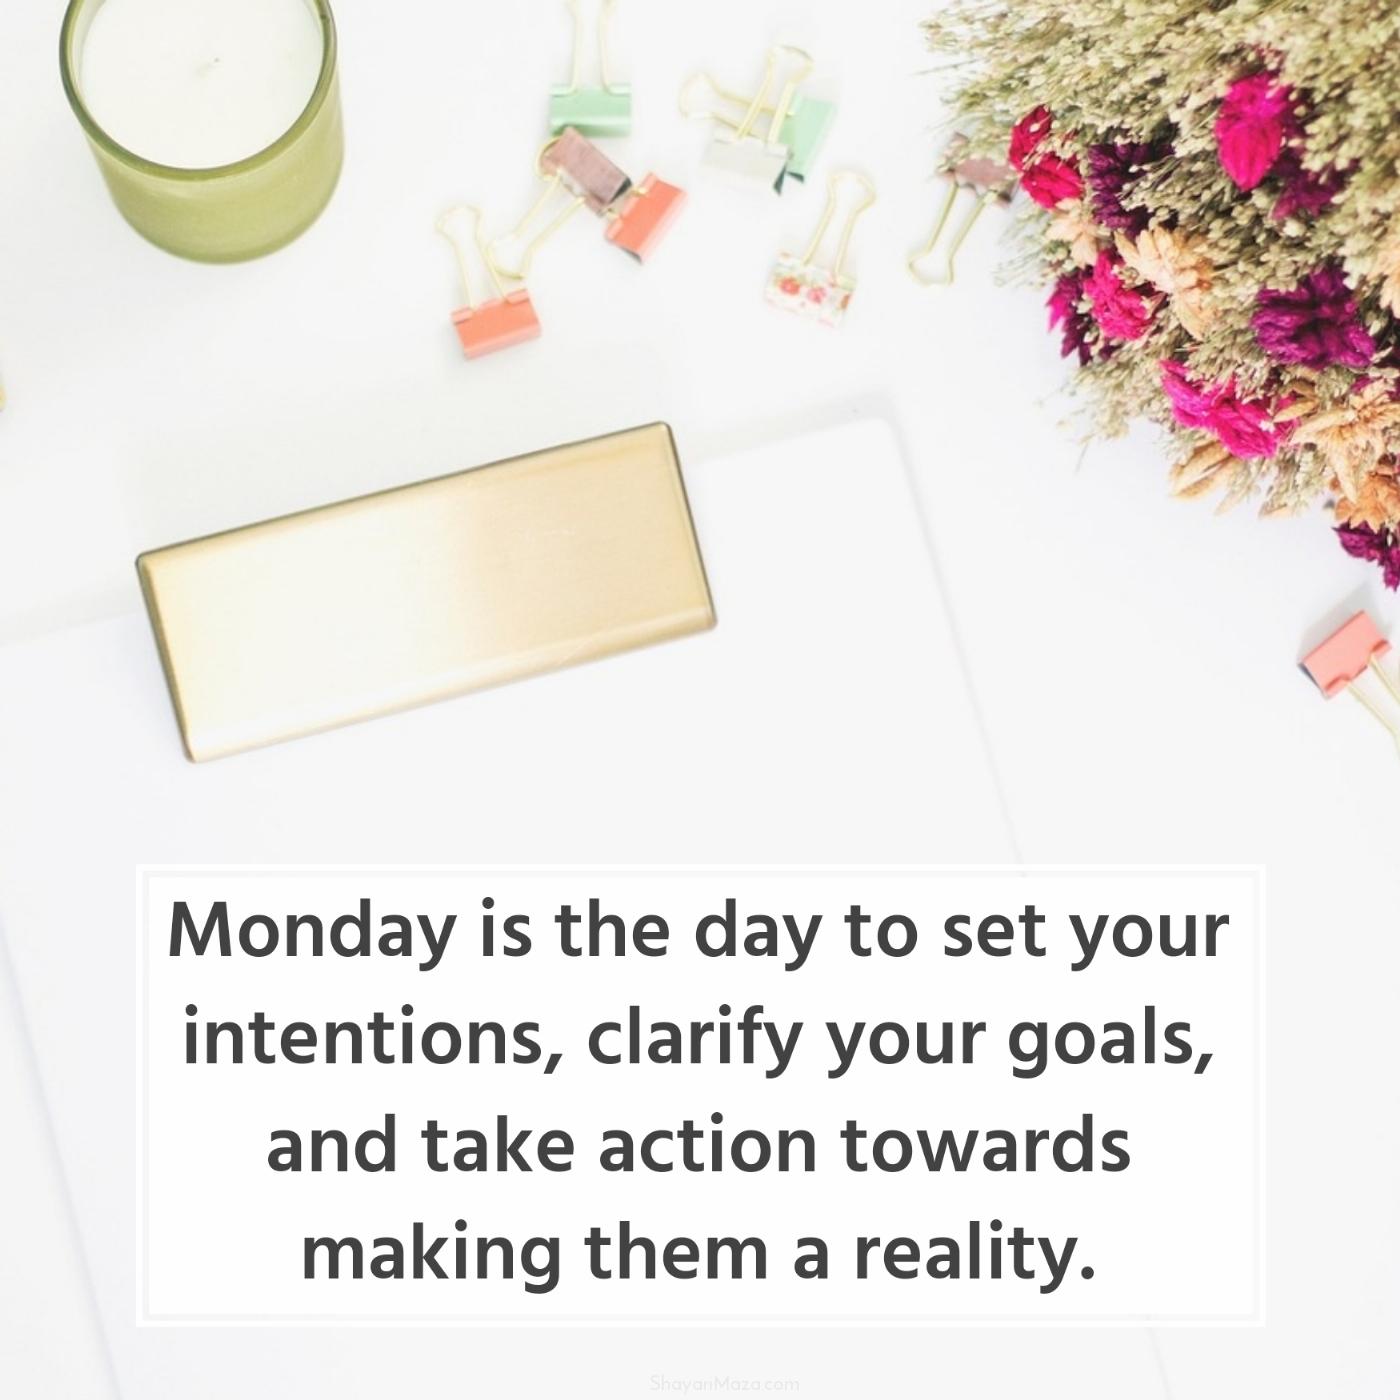 Monday is the day to set your intentions clarify your goals